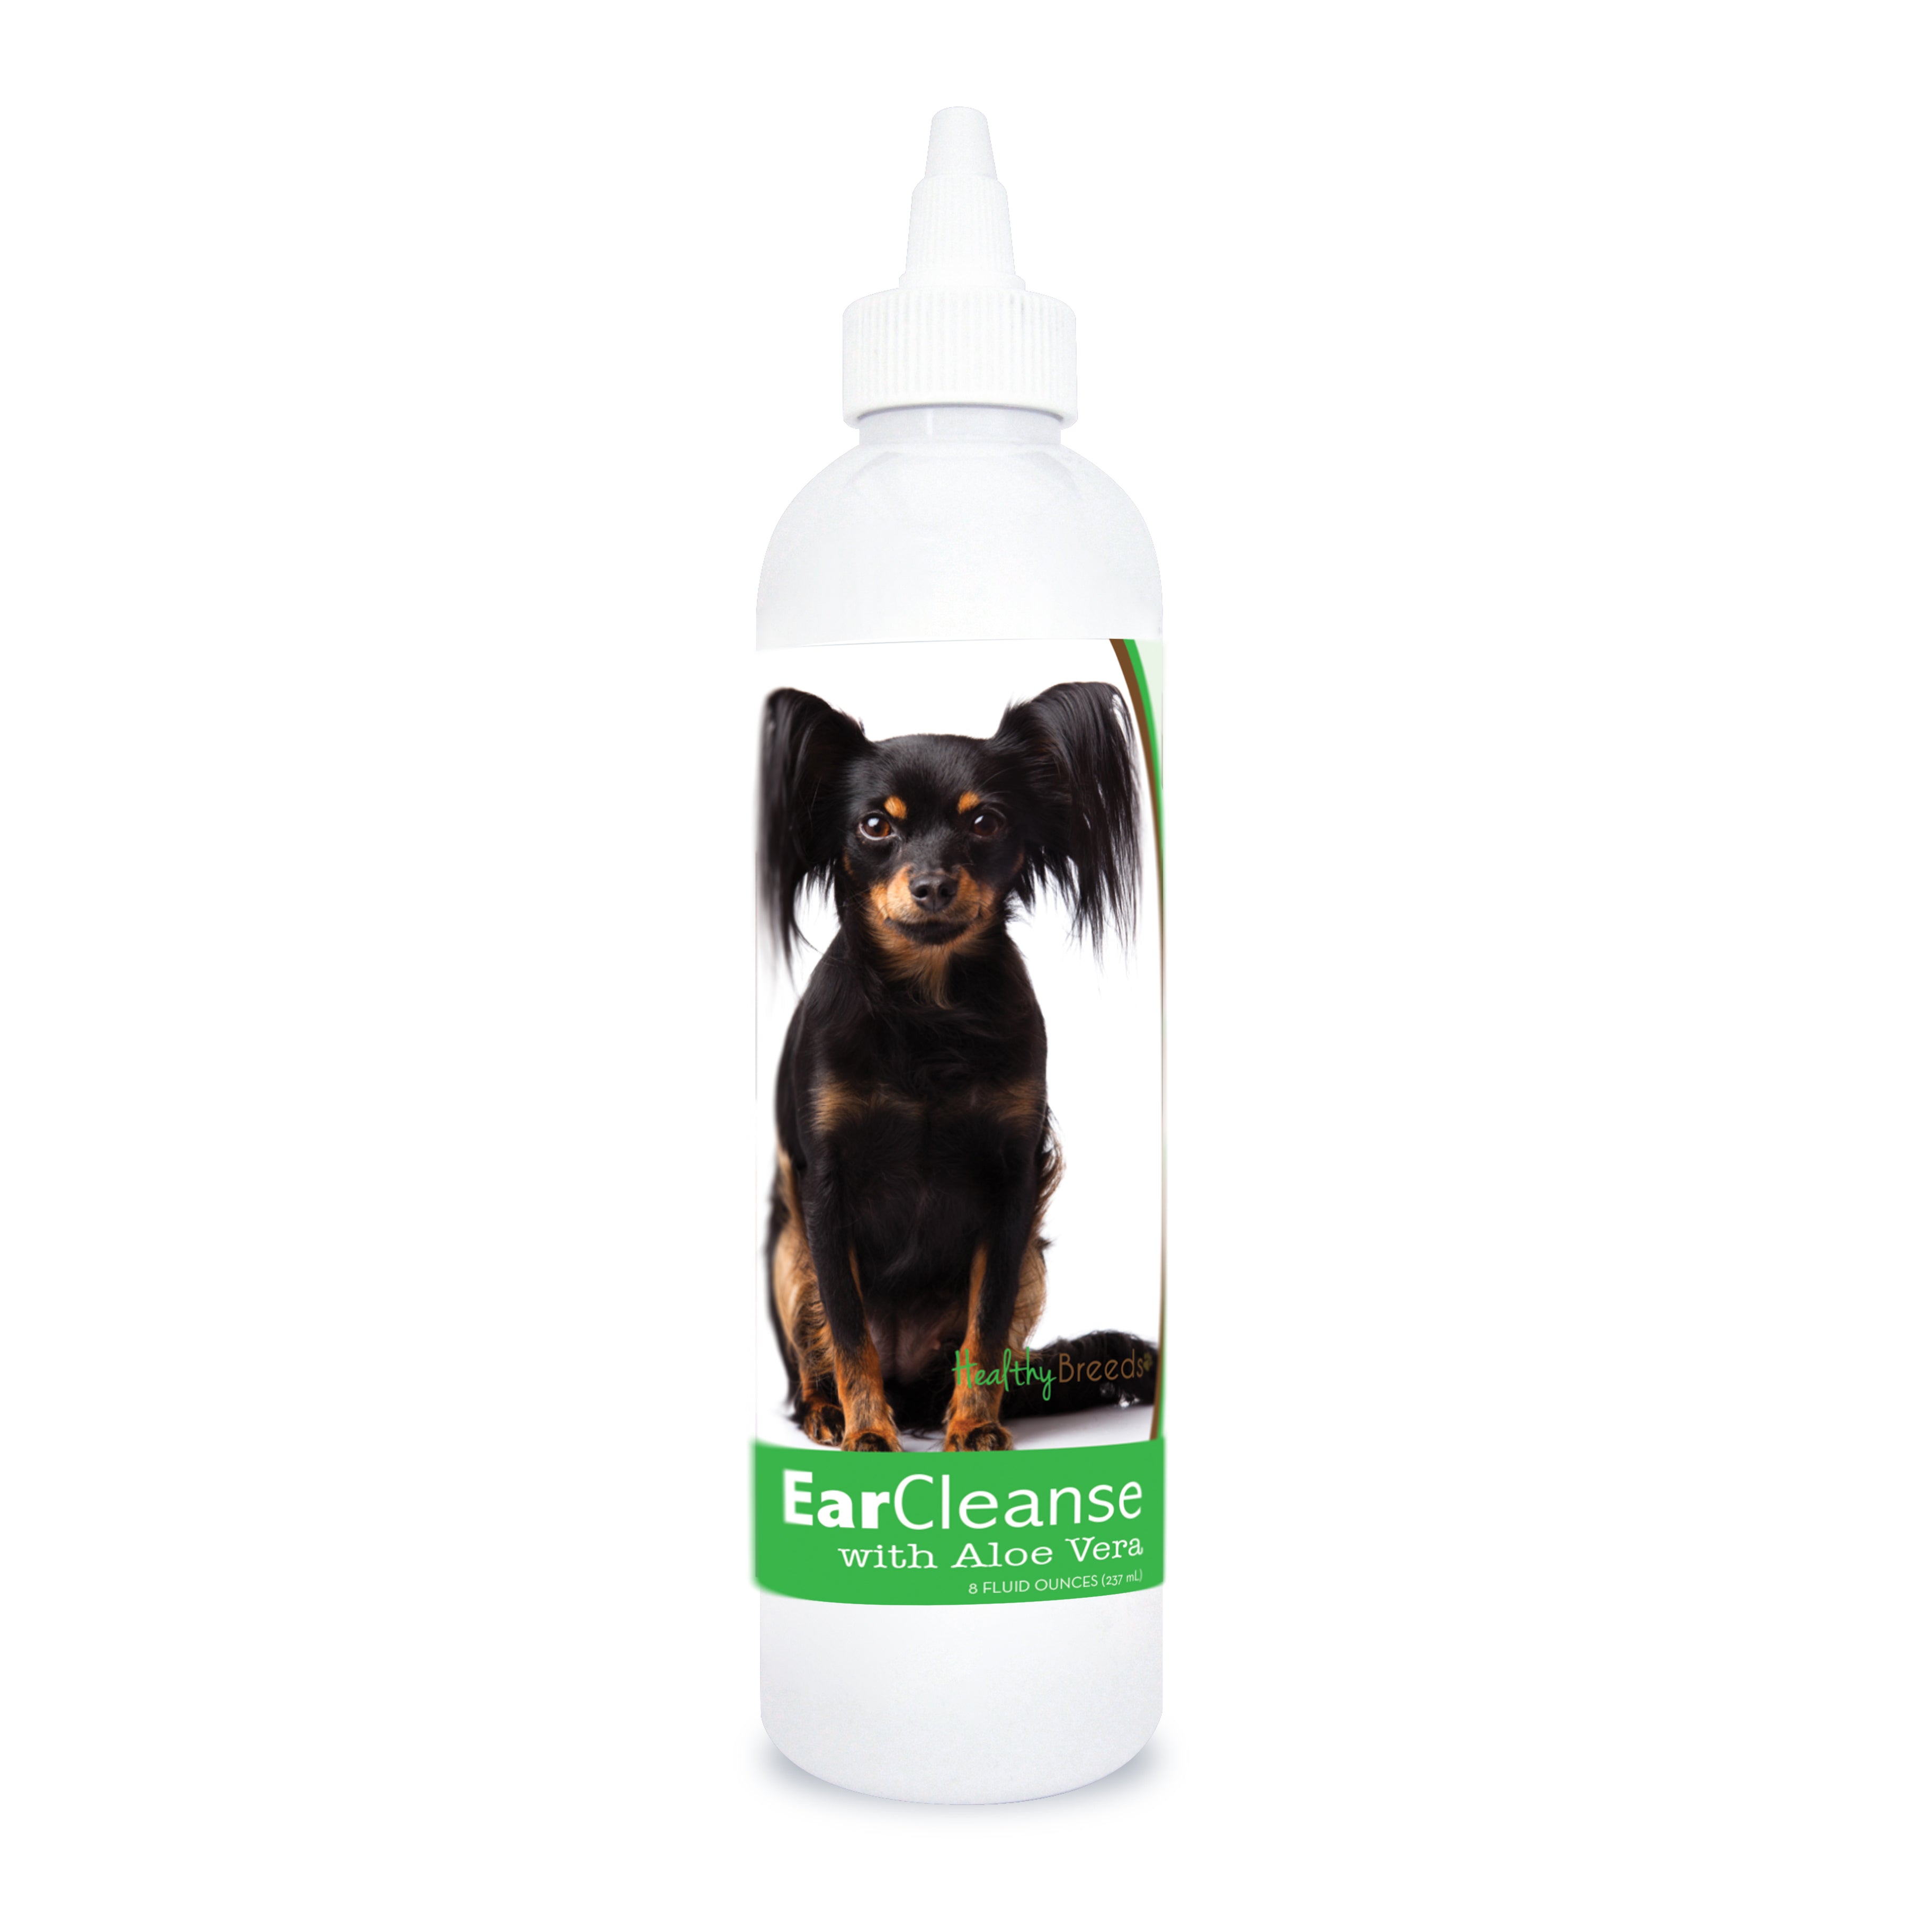 Russian Toy Terrier Ear Cleanse with Aloe Vera Cucumber Melon 8 oz